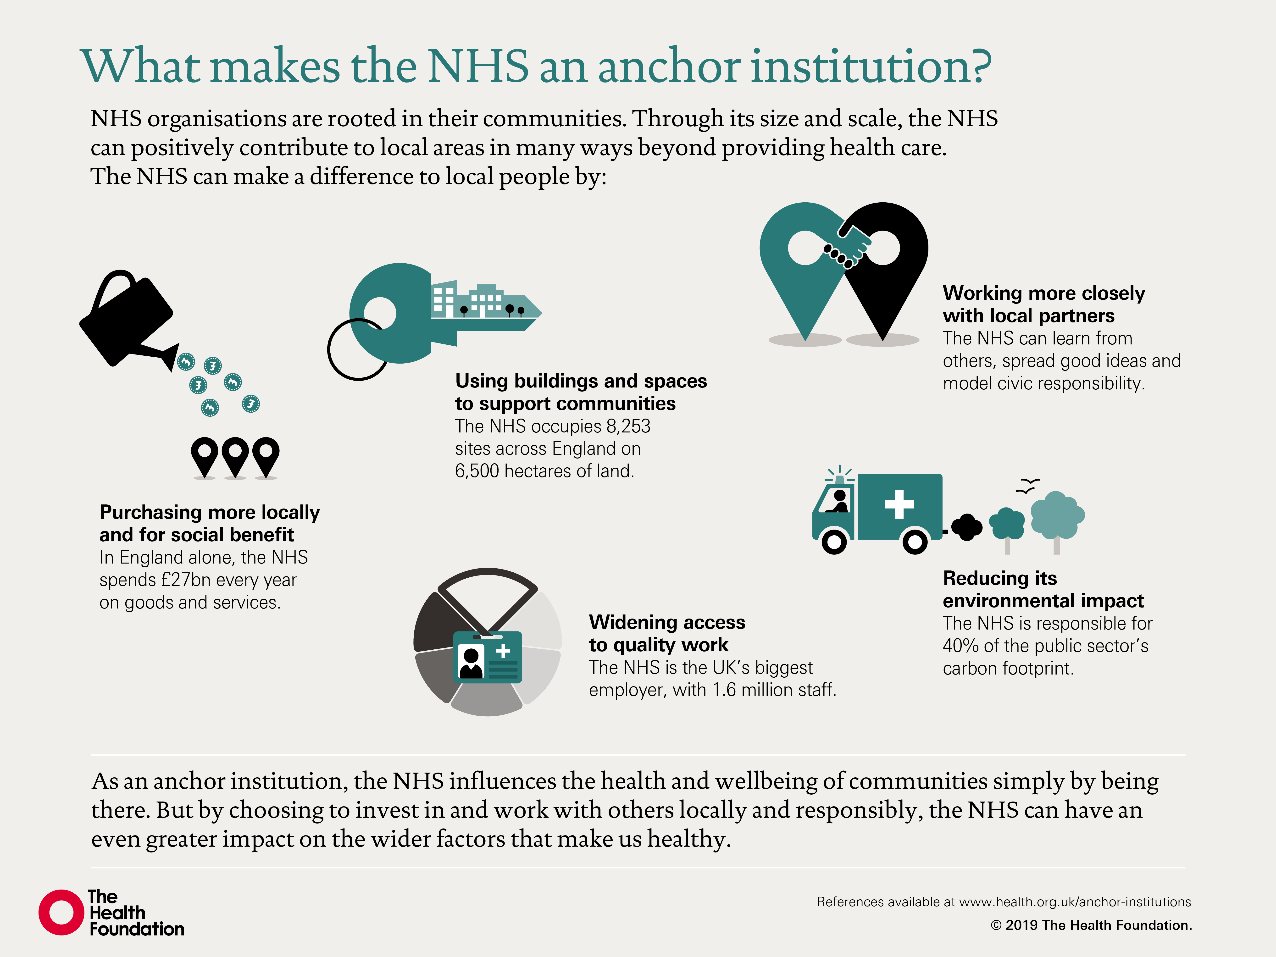 What is an Anchor Trust